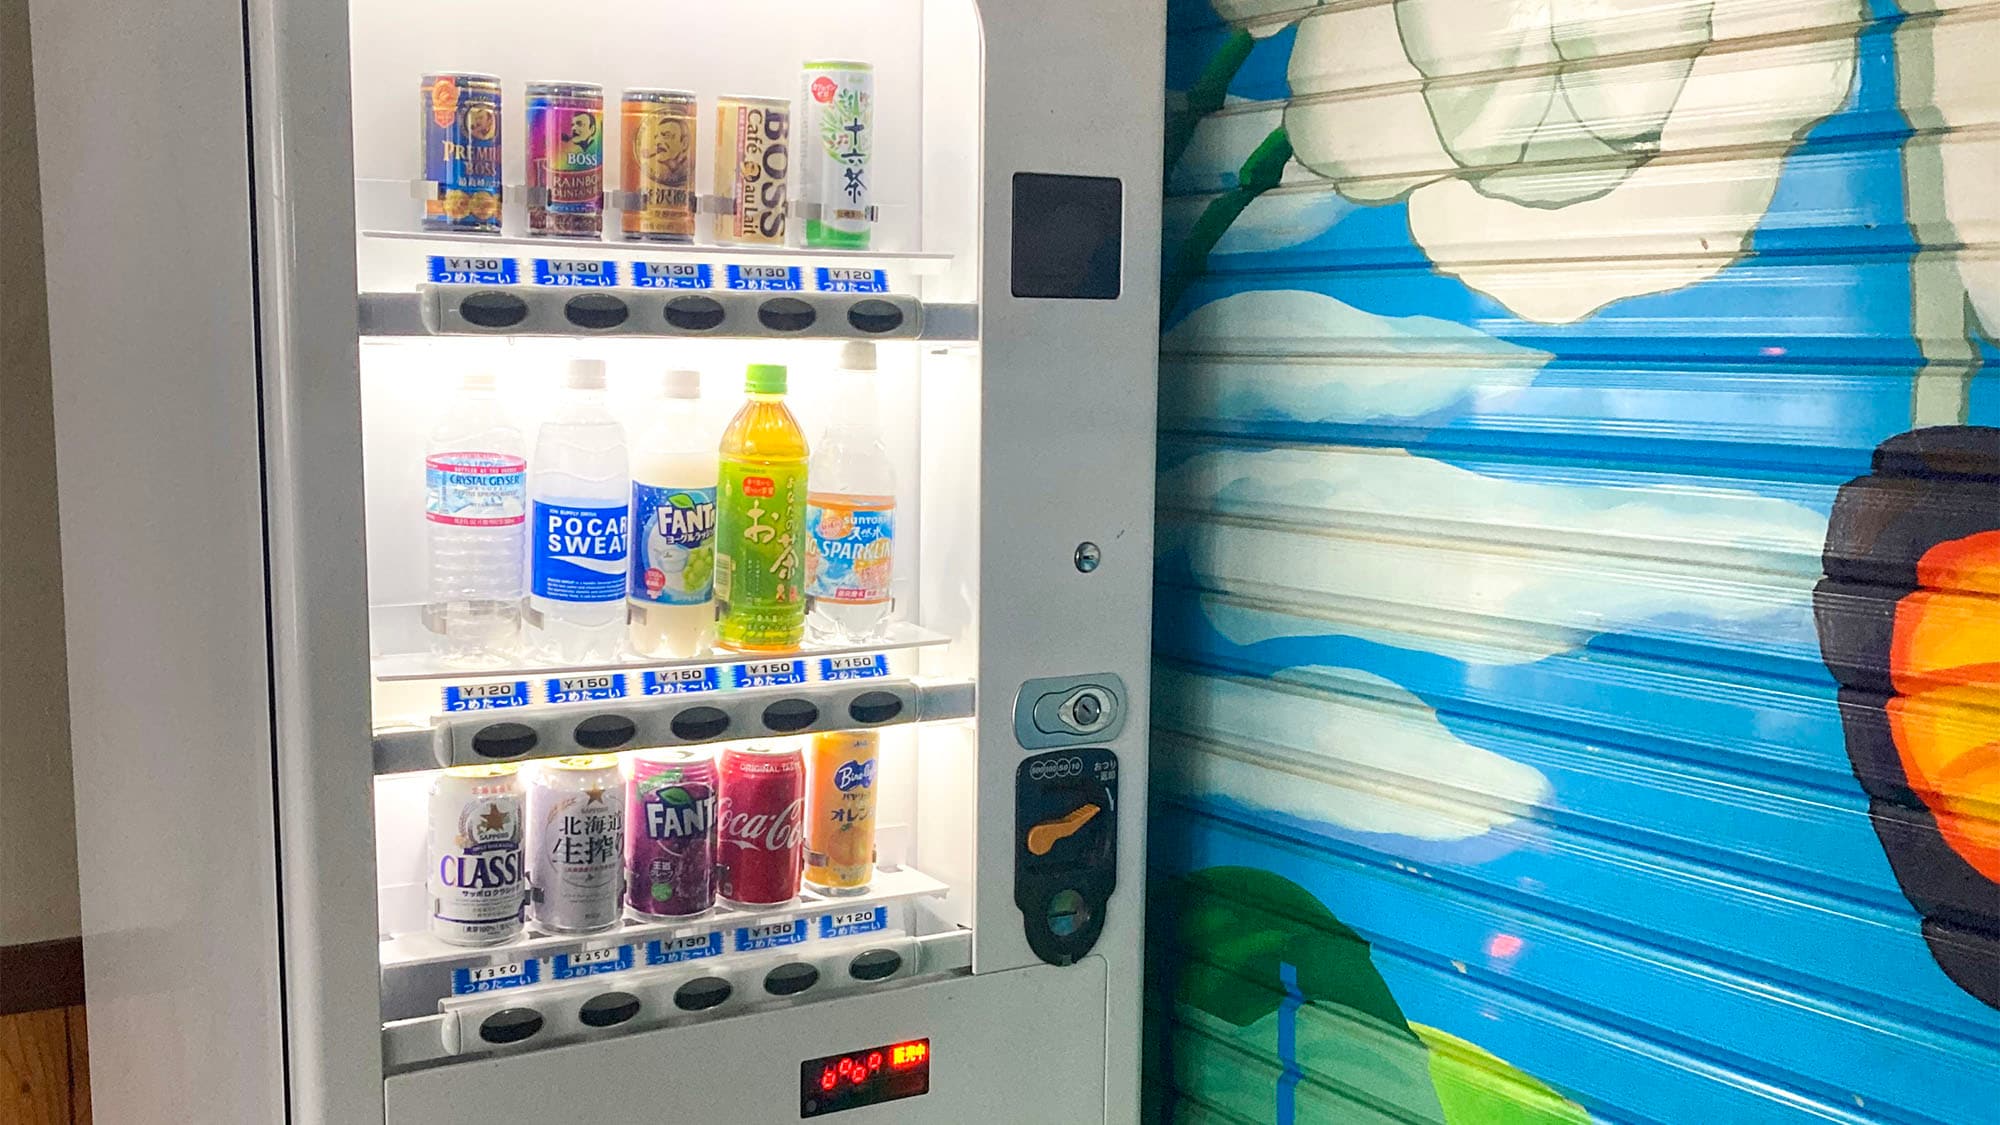 ・ [Inside] There is a vending machine